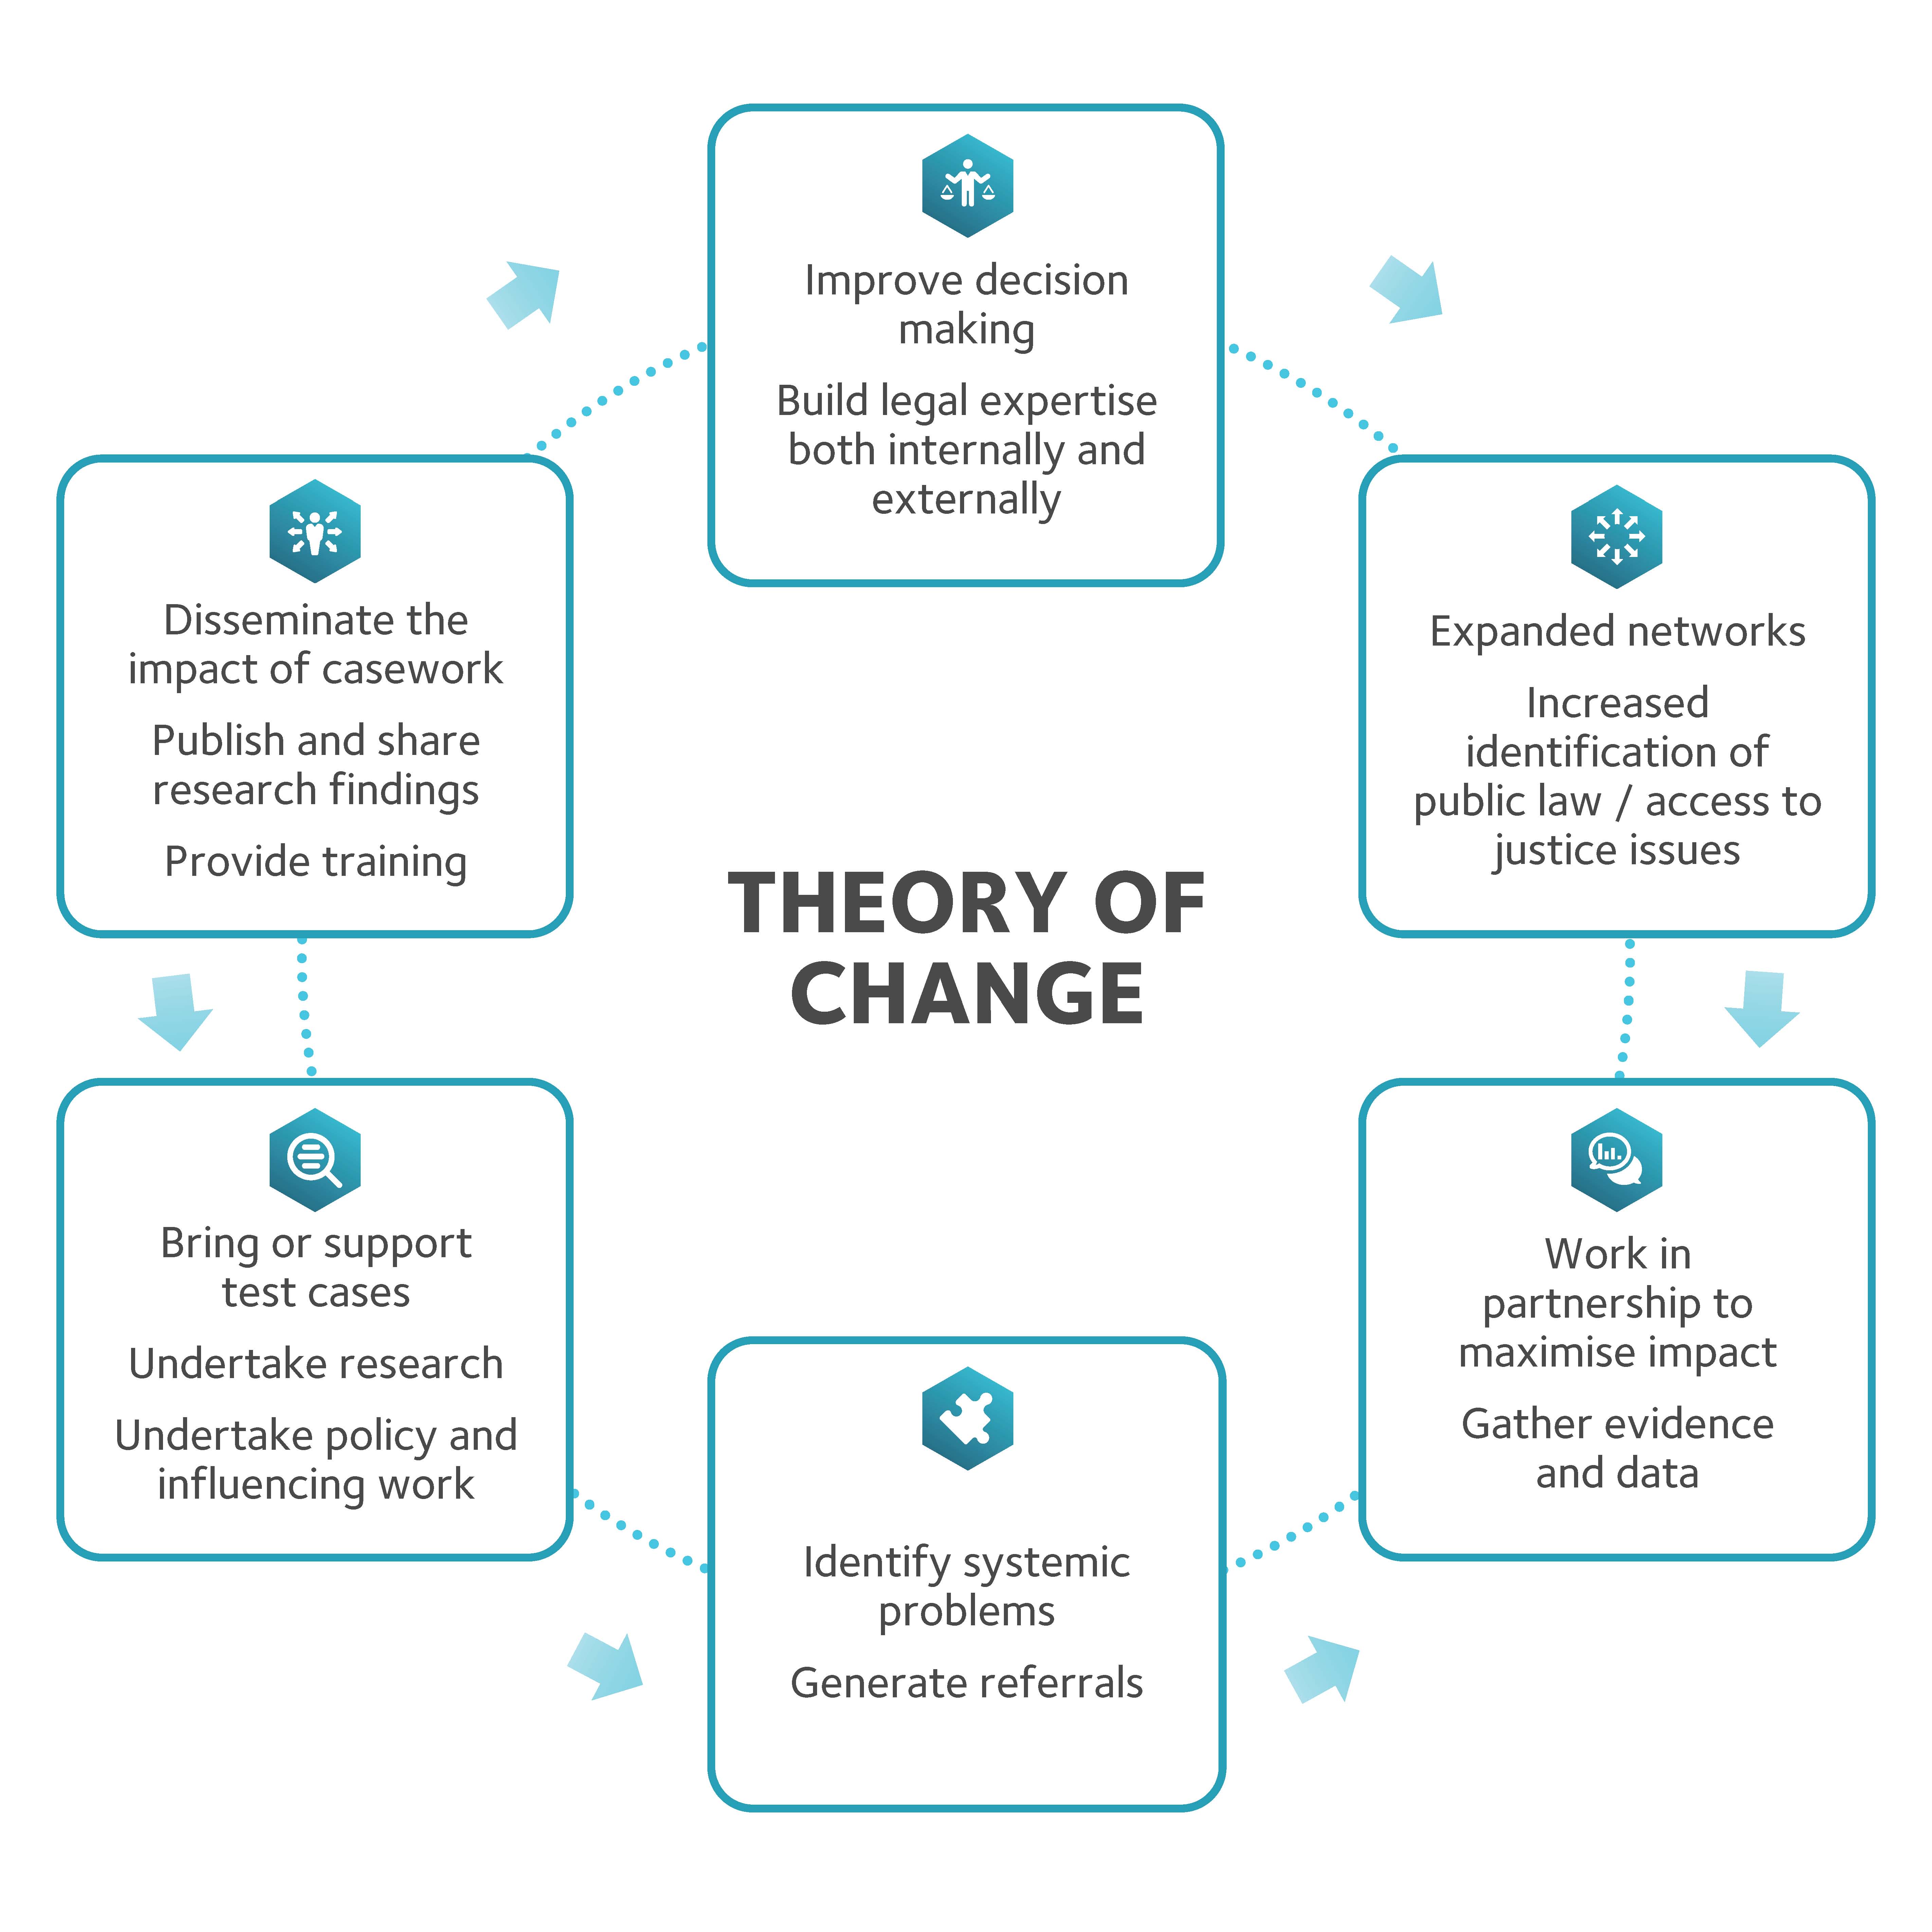 theory of change revised2x Public Law Project